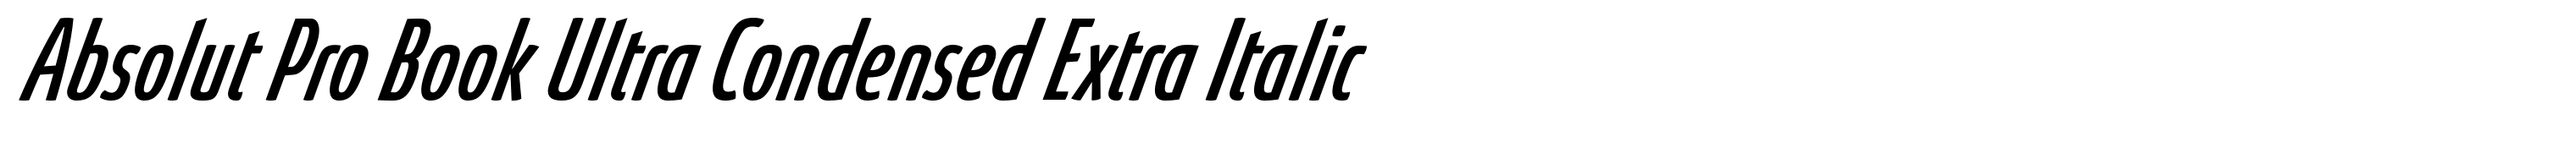 Absolut Pro Book Ultra Condensed Extra Italic